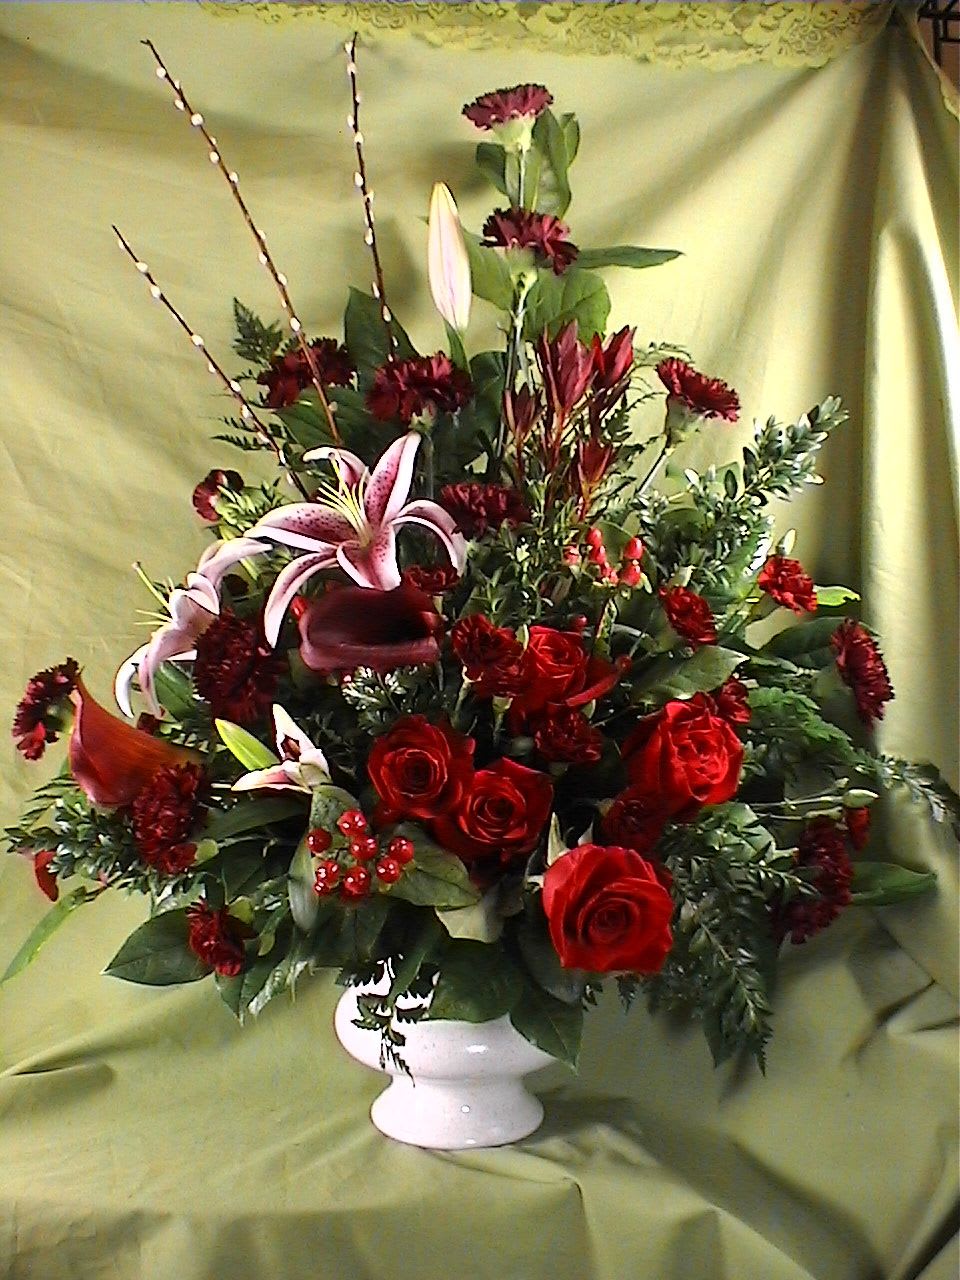 Garnet Sympathy Vase - Pay tribute with this stunning sympathy vase. Assorted varieties of red roses and florals are highlighted with Stargazer Lilies, Pussy Willow Branches and Hypercum Berries. Flower varieties and container may vary depending on availability and season.